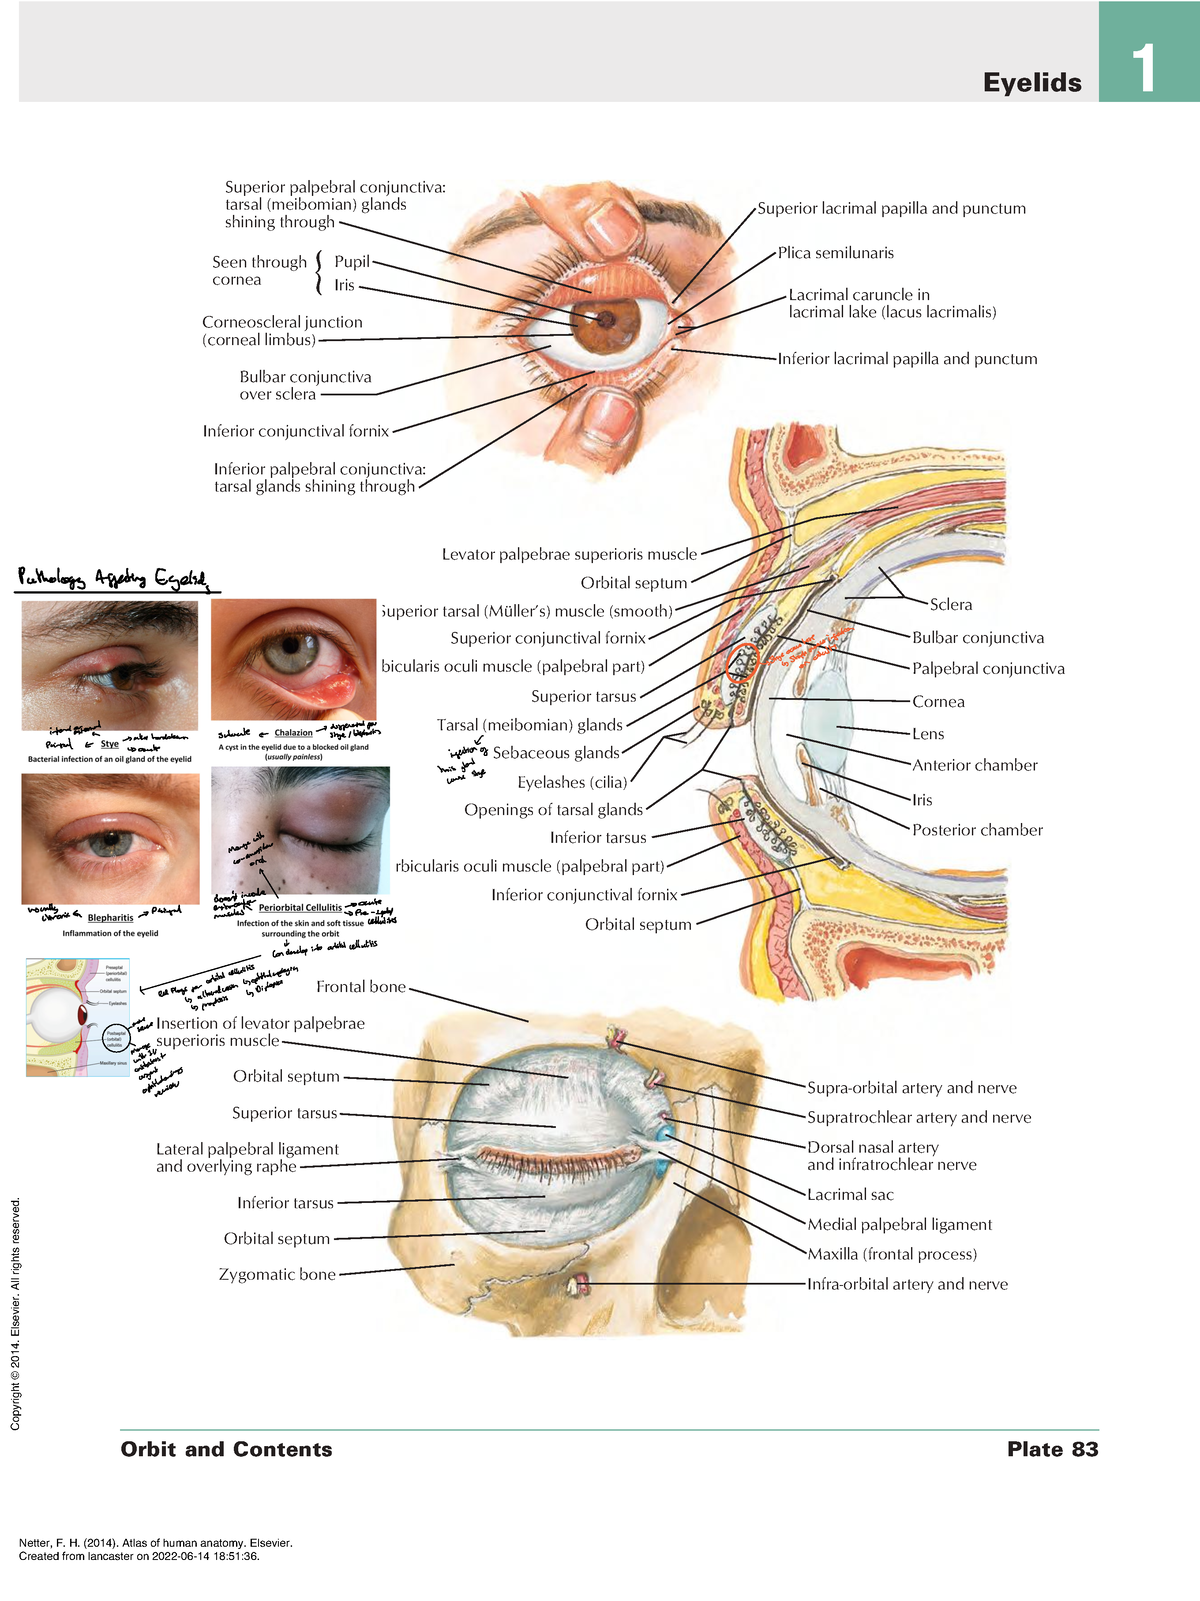 Anatomy of the Orbit: Overall Aspects of the Peri- and Intra Orbital Soft  Tissues | SpringerLink